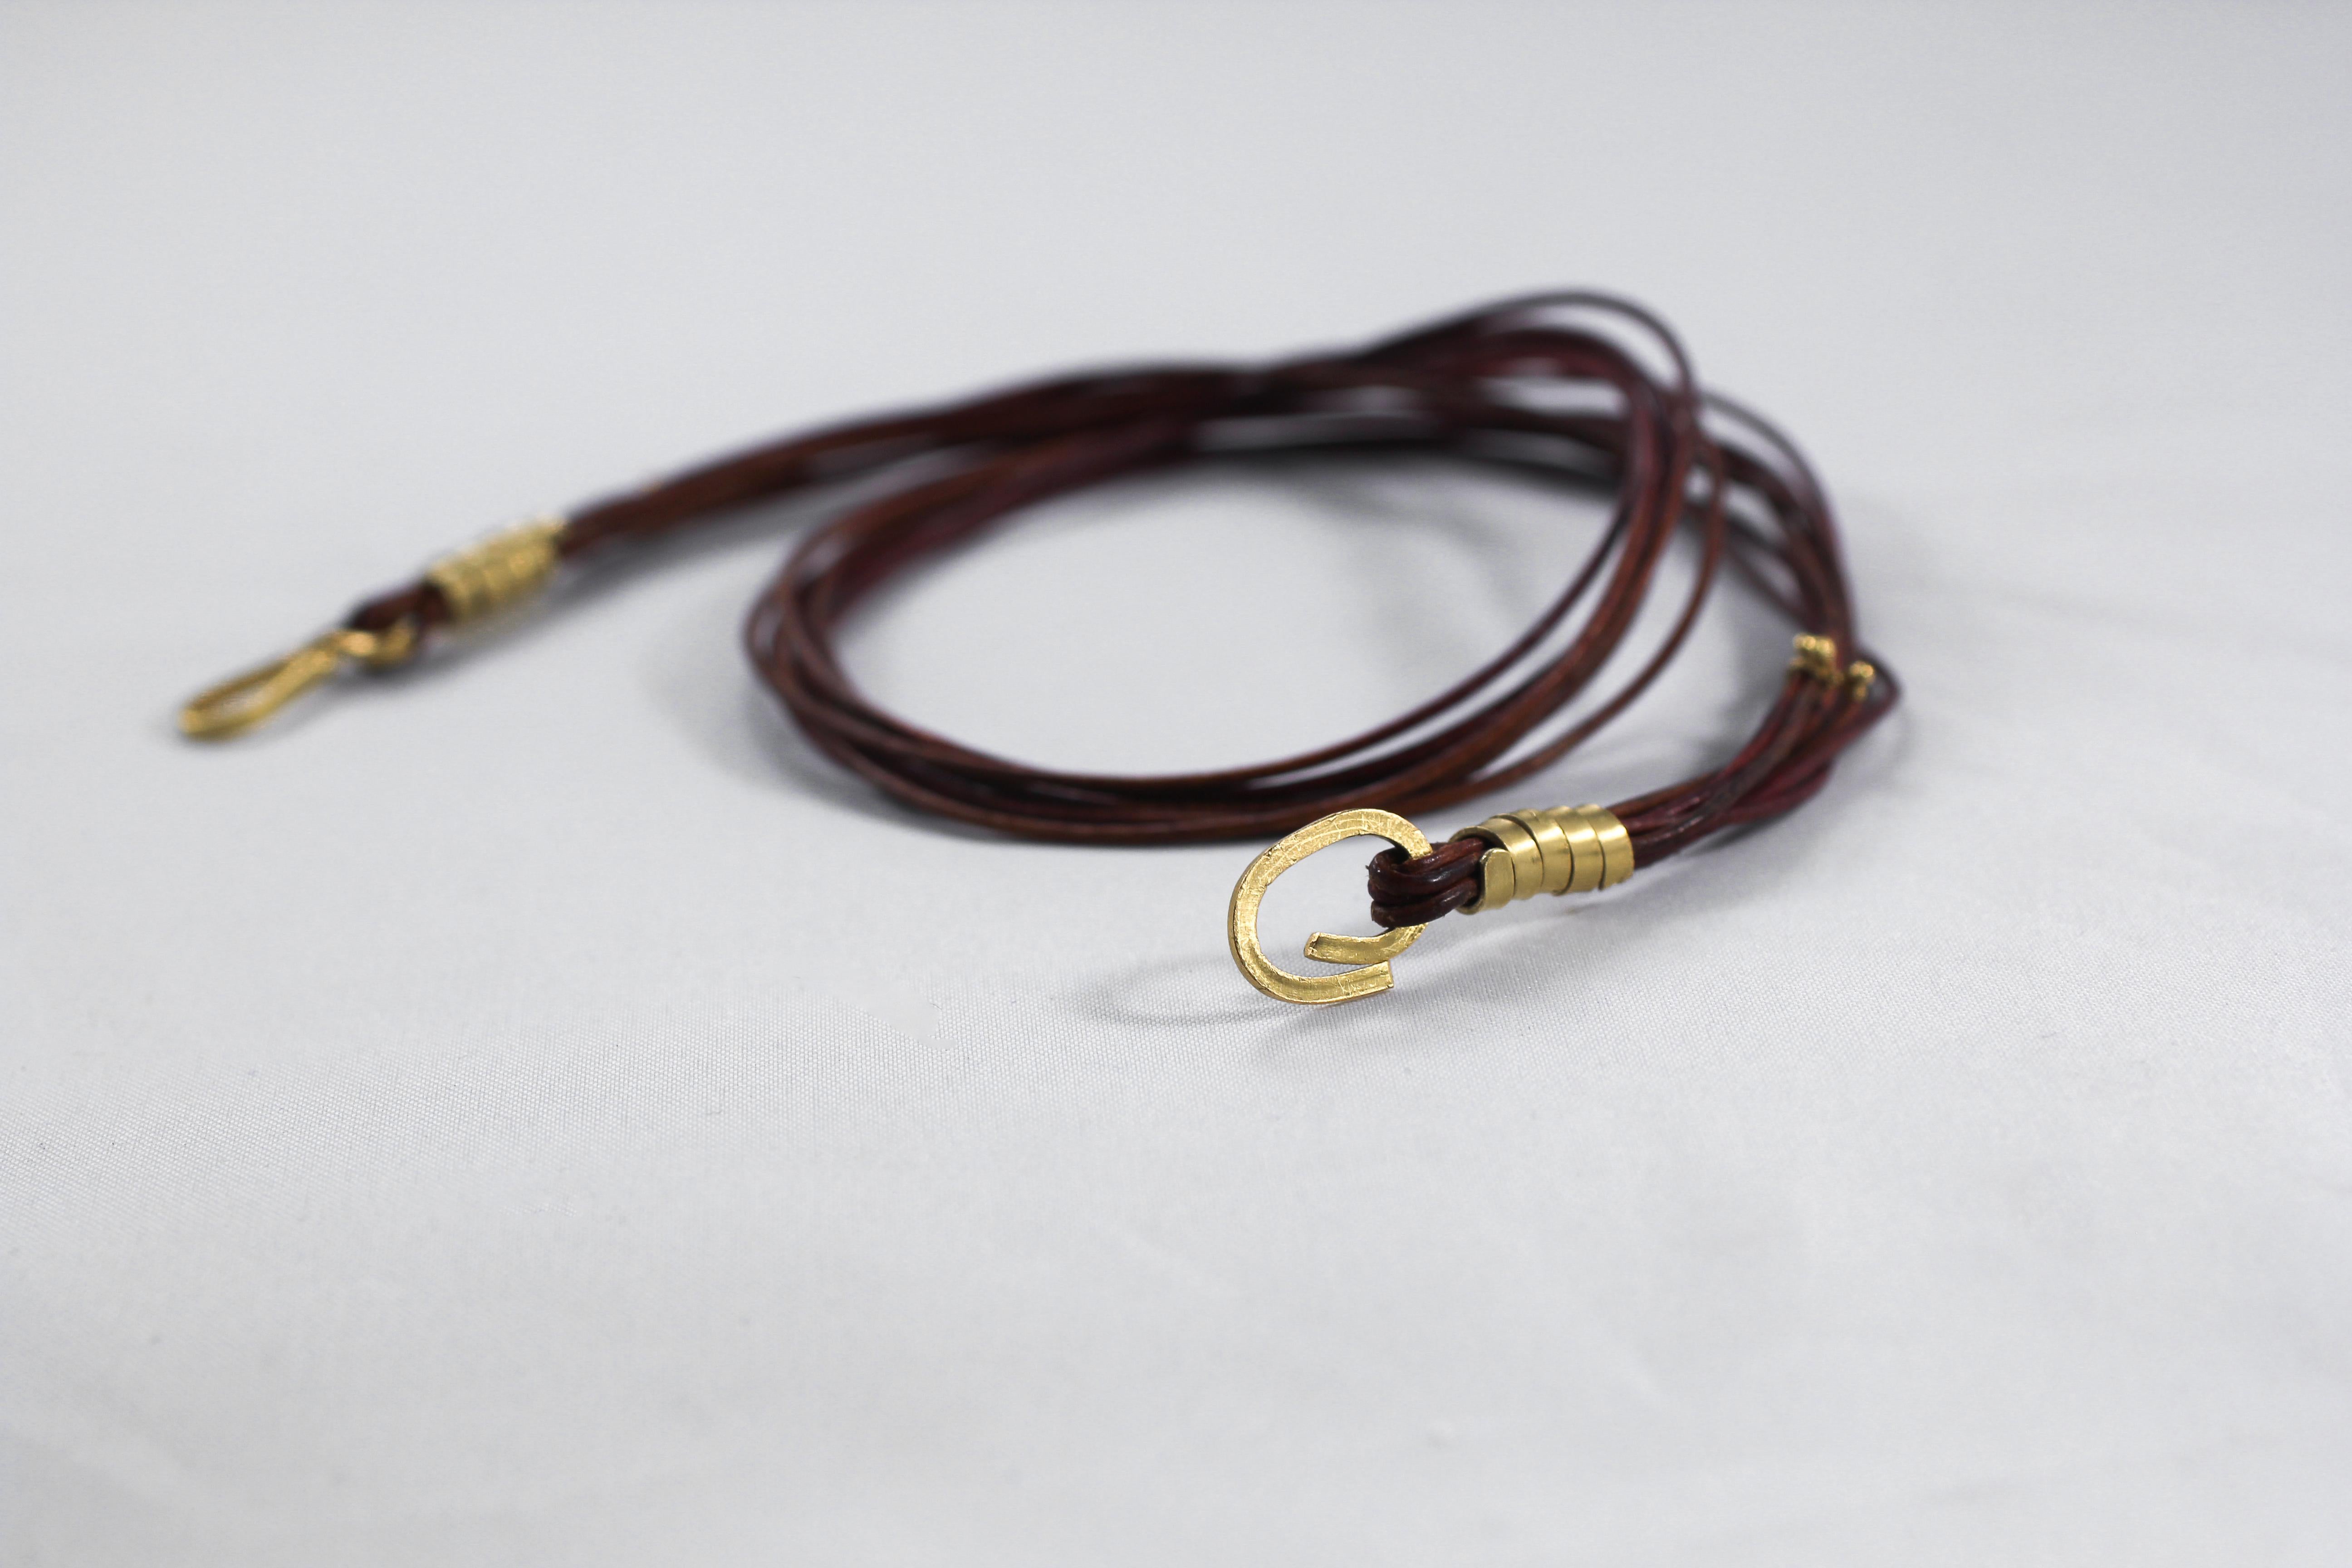 Leather multi-strand rope choker ending with an 18K gold handmade toggle clasp. Can be worn with our DANCE pendants. Created for modern living. Show your sense of whimsy with this stylish design.

The inspiration for this chain comes from nature,